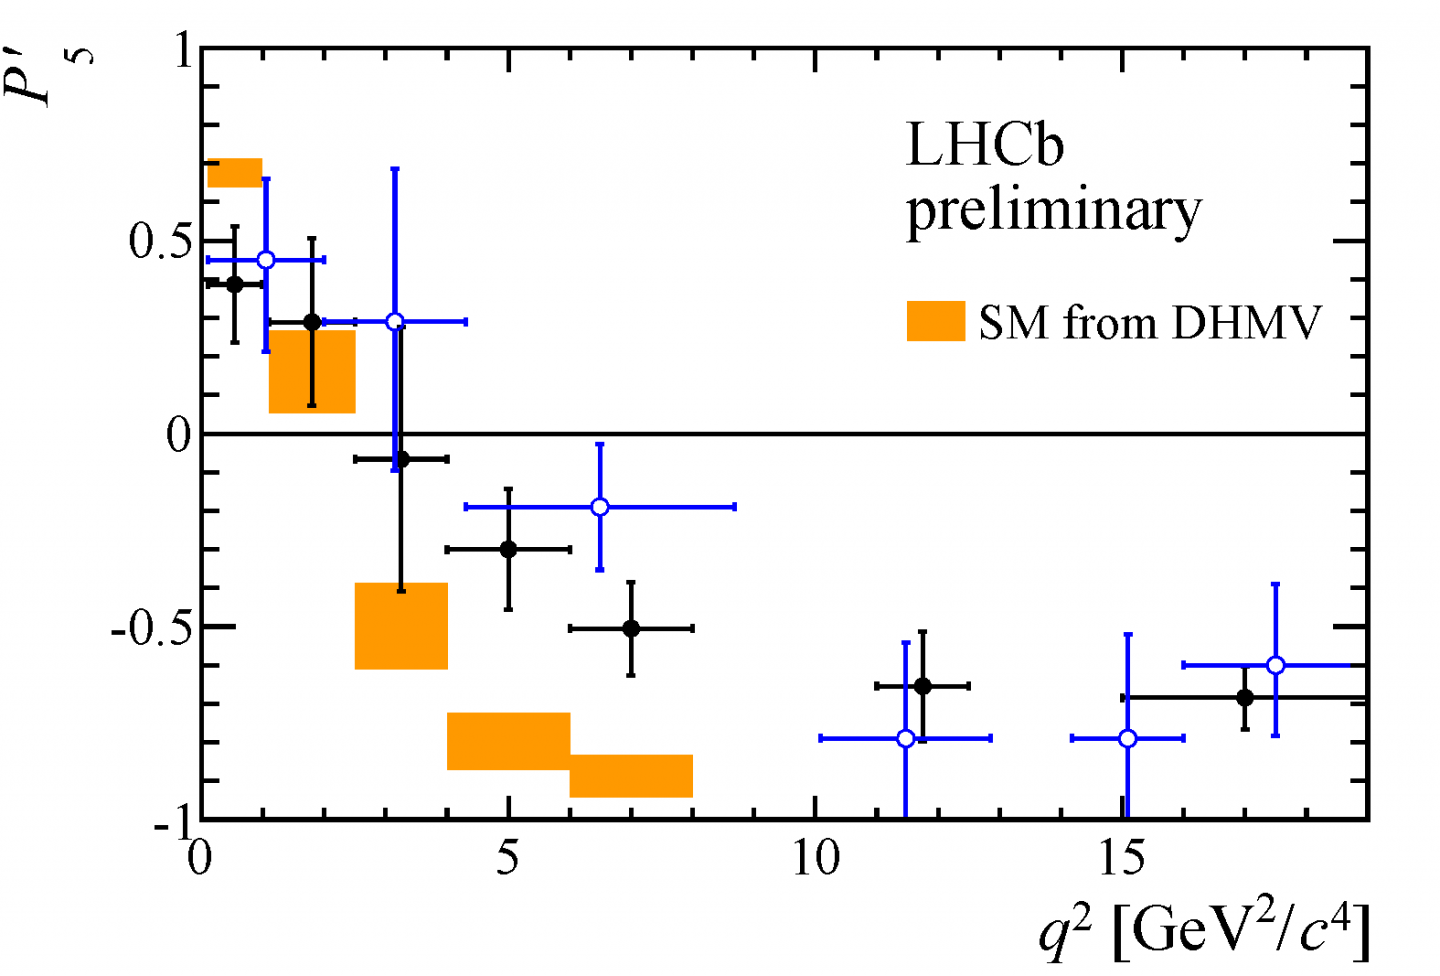 LHCb's new analysis confirms old puzzle